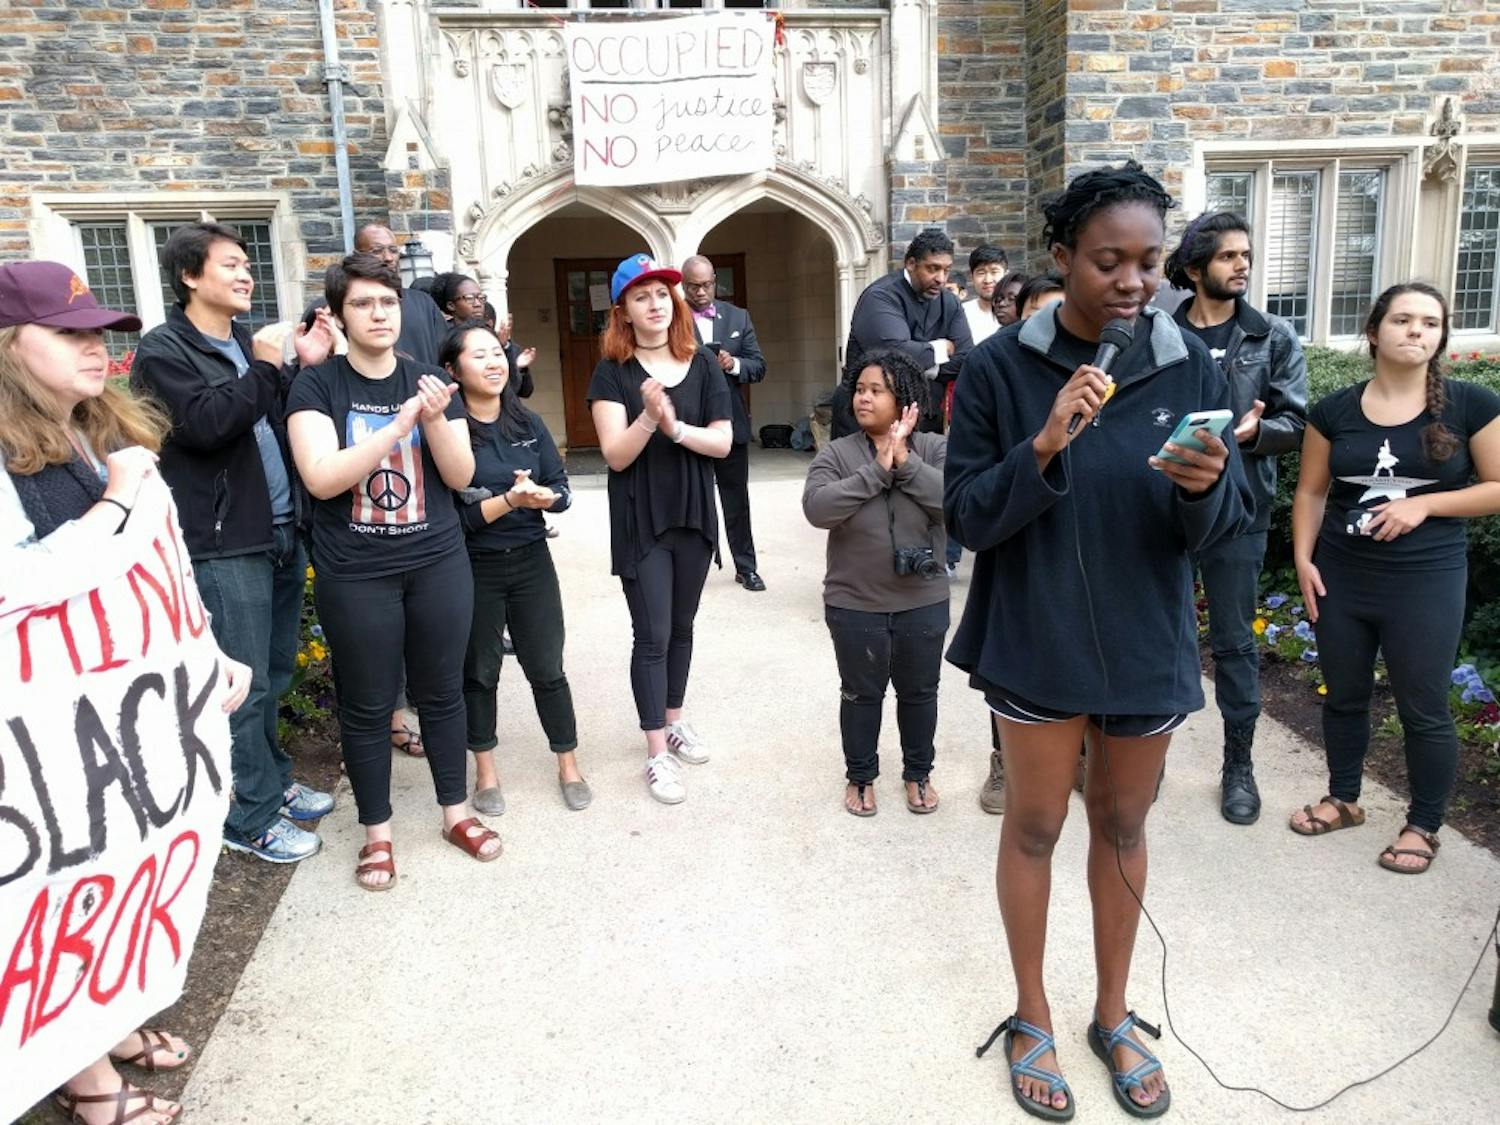 The eight students read statements after exiting the Allen Building.